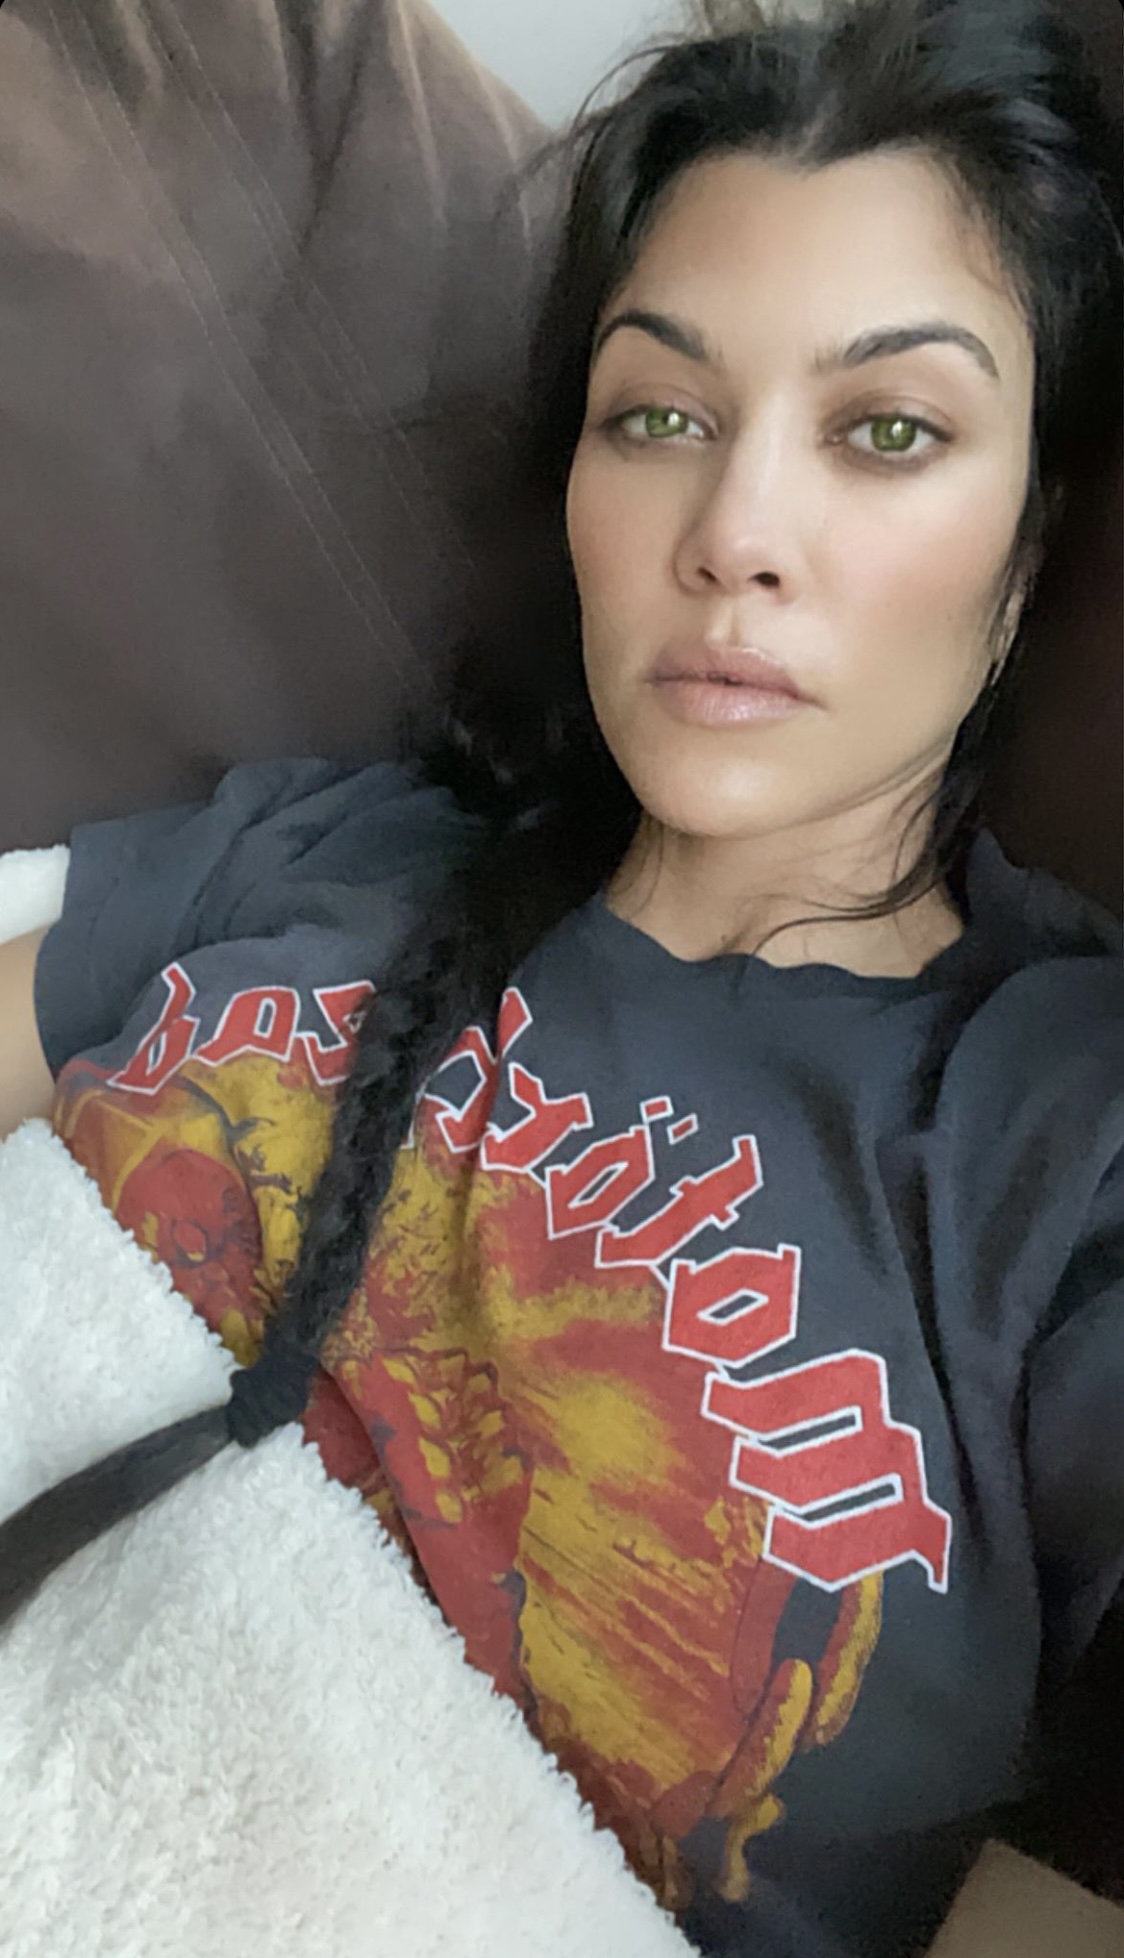 Kourtney Kardashian Looks Like A Completely Different Person! Is Her Wild New Look For Travis Barker?? 